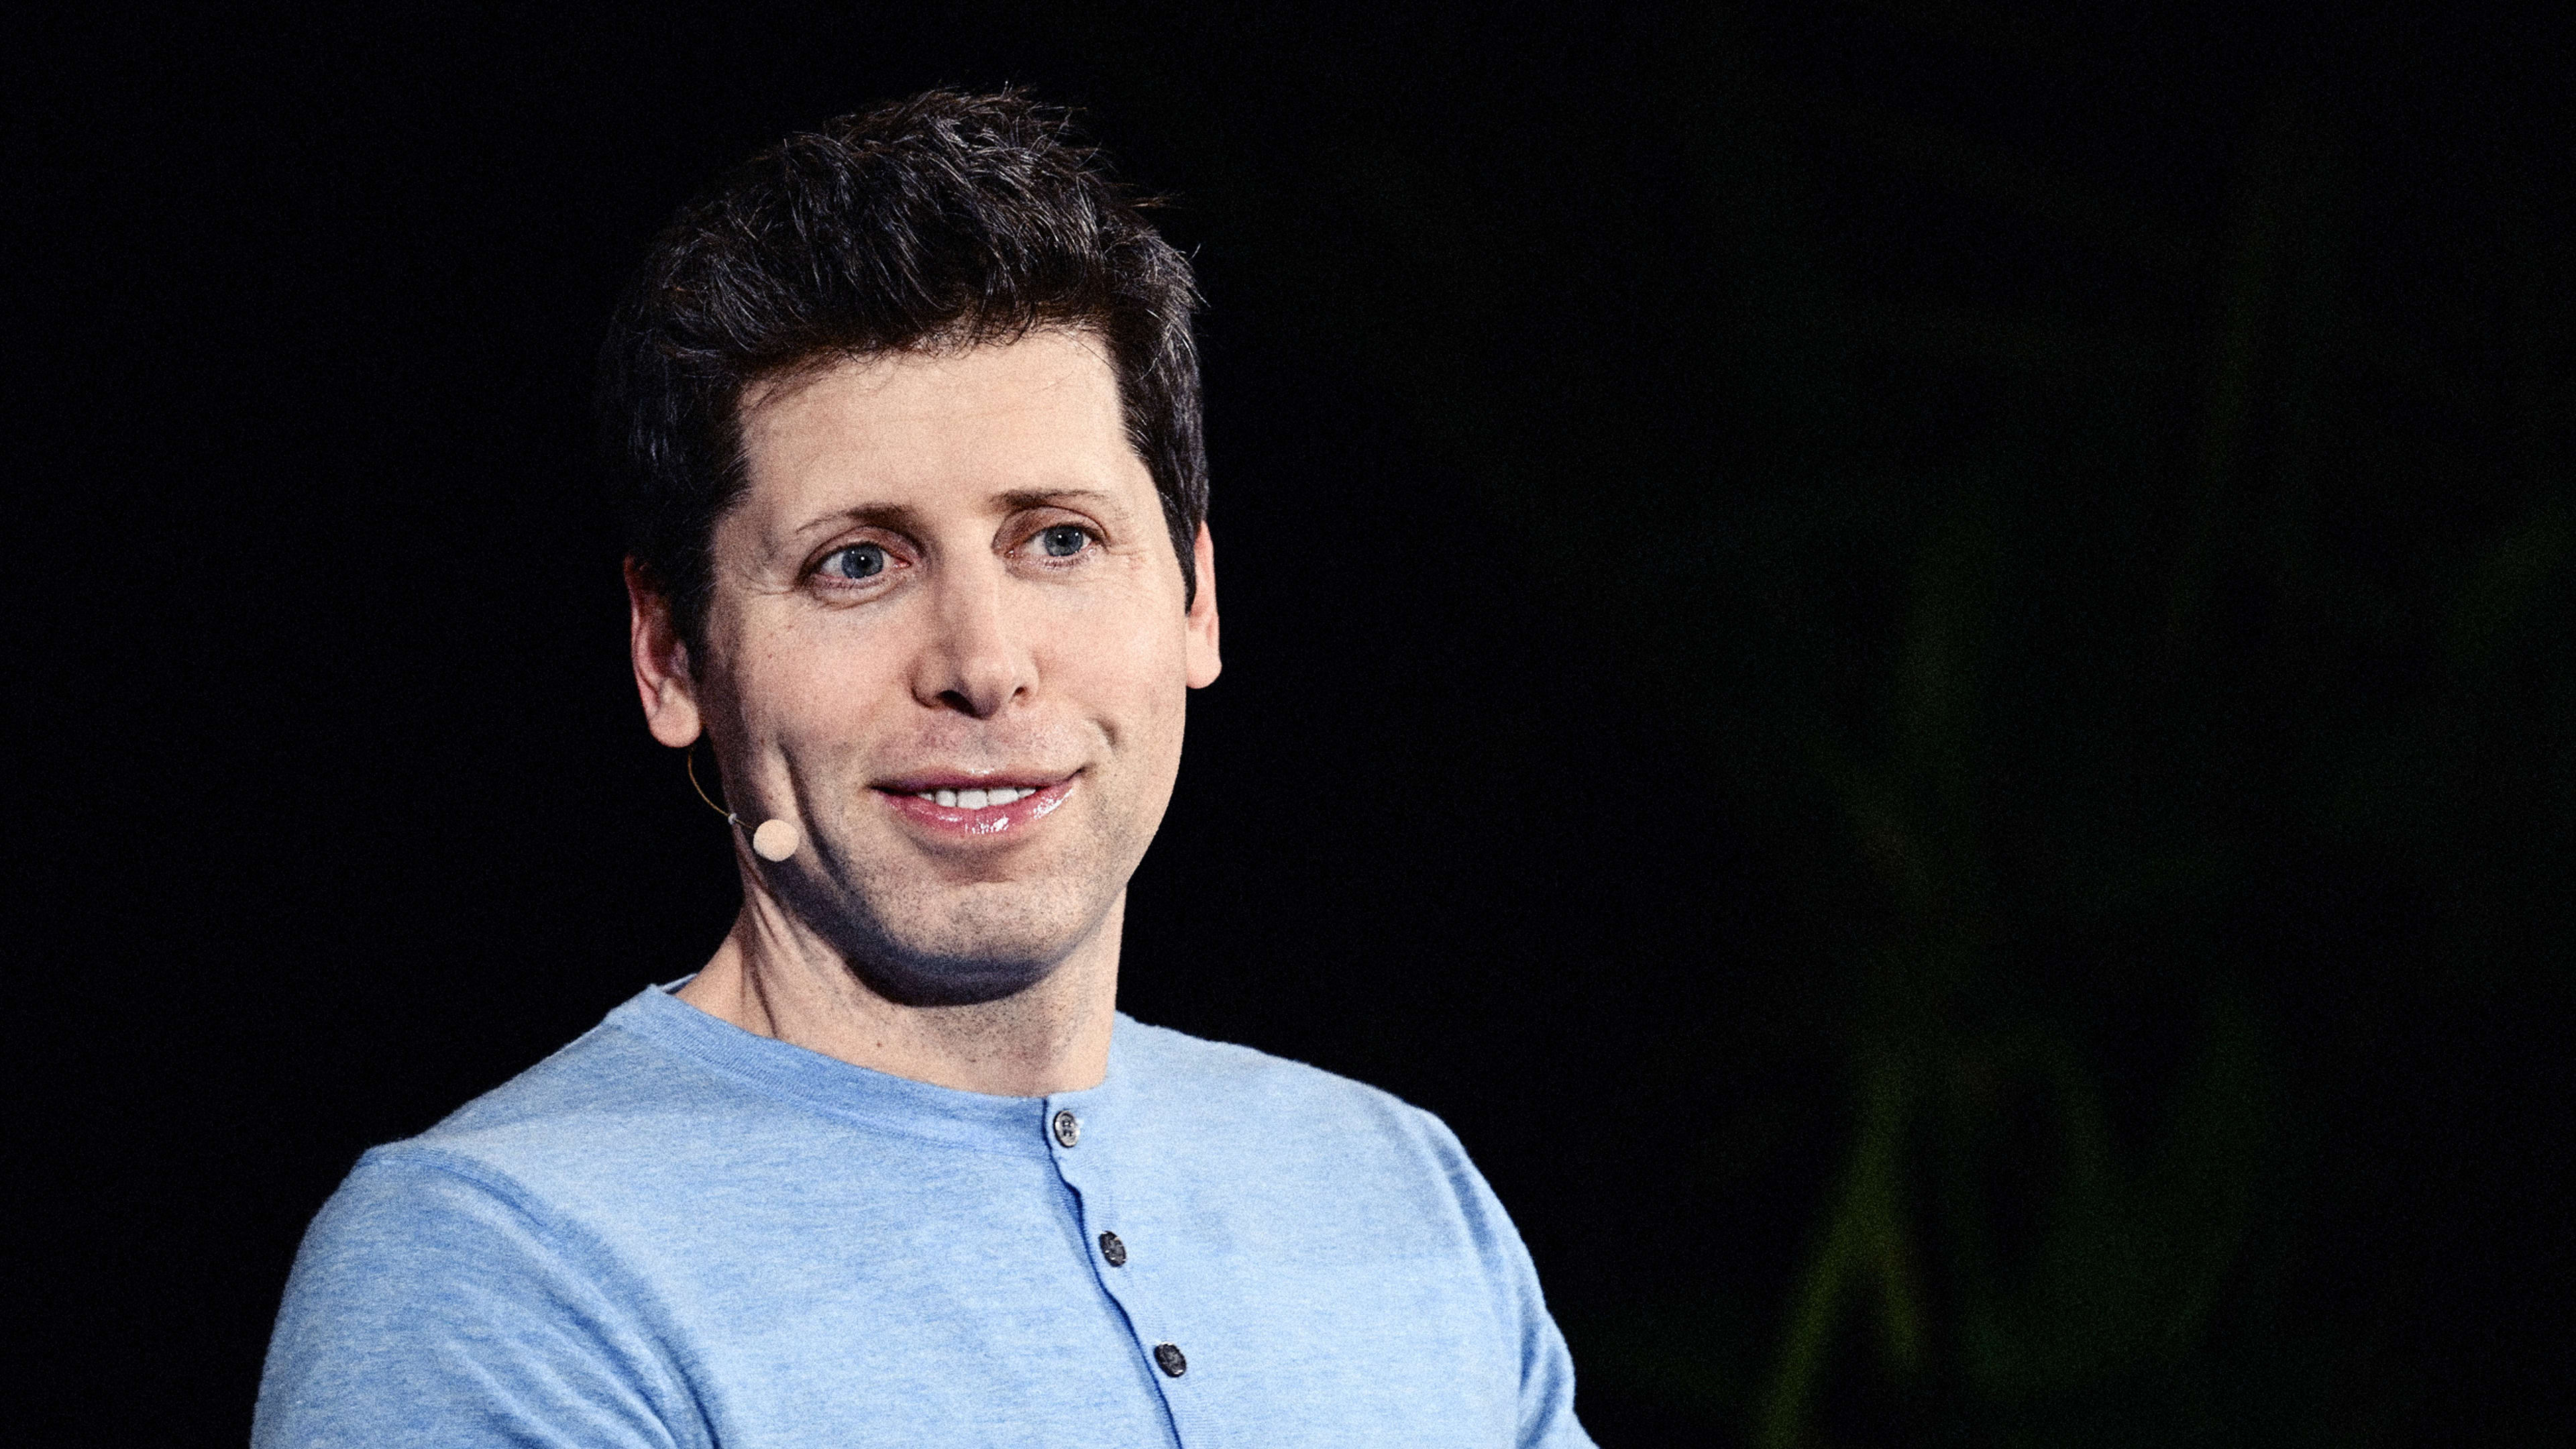 The latest we know about Sam Altman’s potential return to OpenAI after a chaotic weekend of boardroom drama